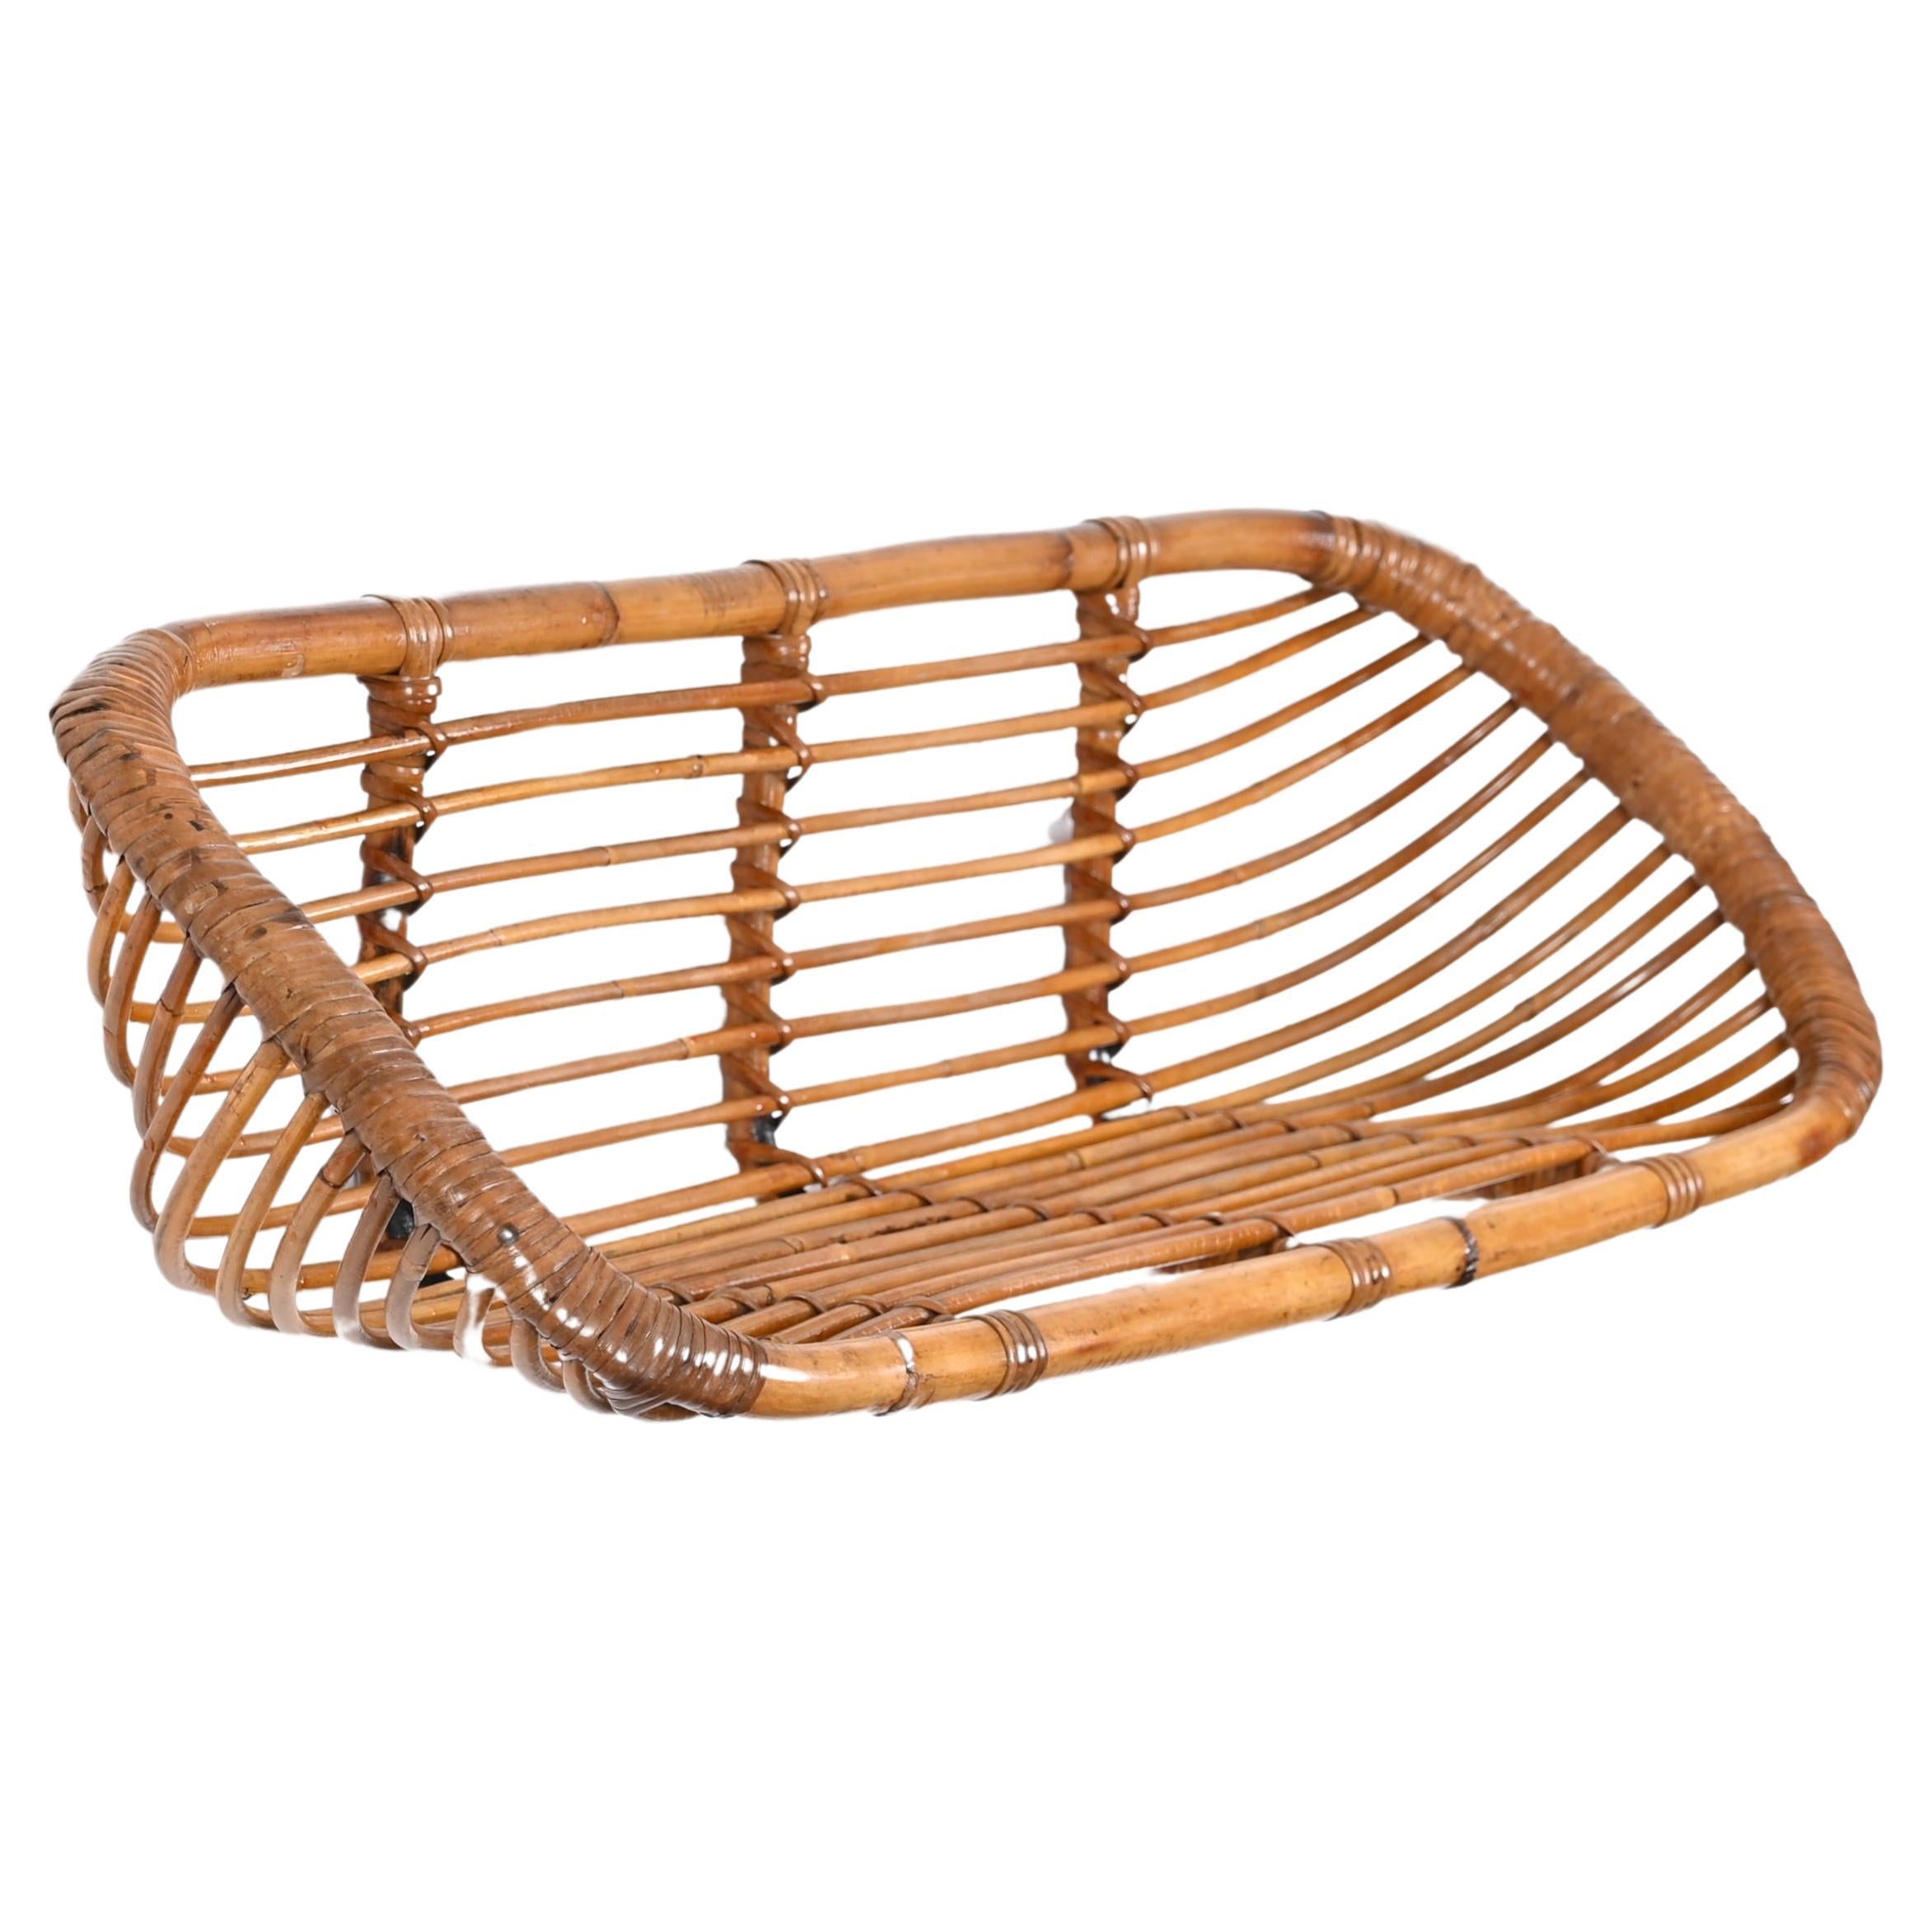  Franco Albini Mid-Century Wall Shelf in Rattan and Bamboo, Italy, 1960s For Sale